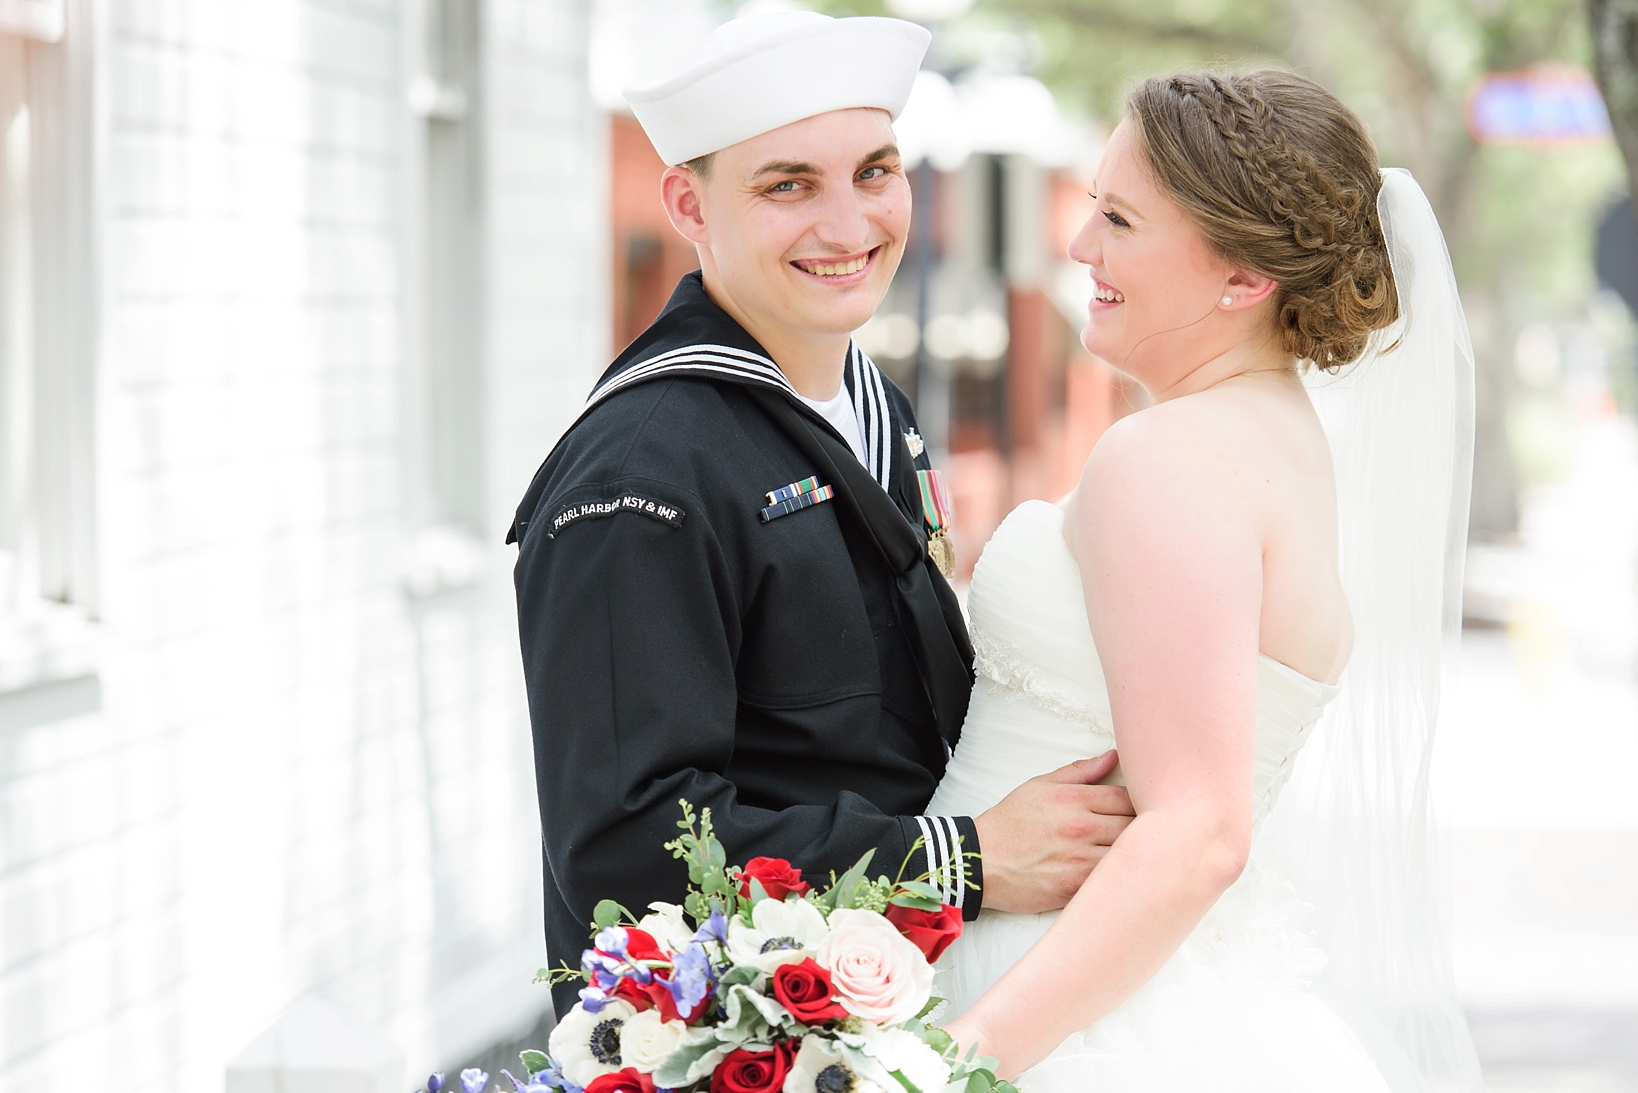 Groom in his military uniform smiles as his bride laughs on